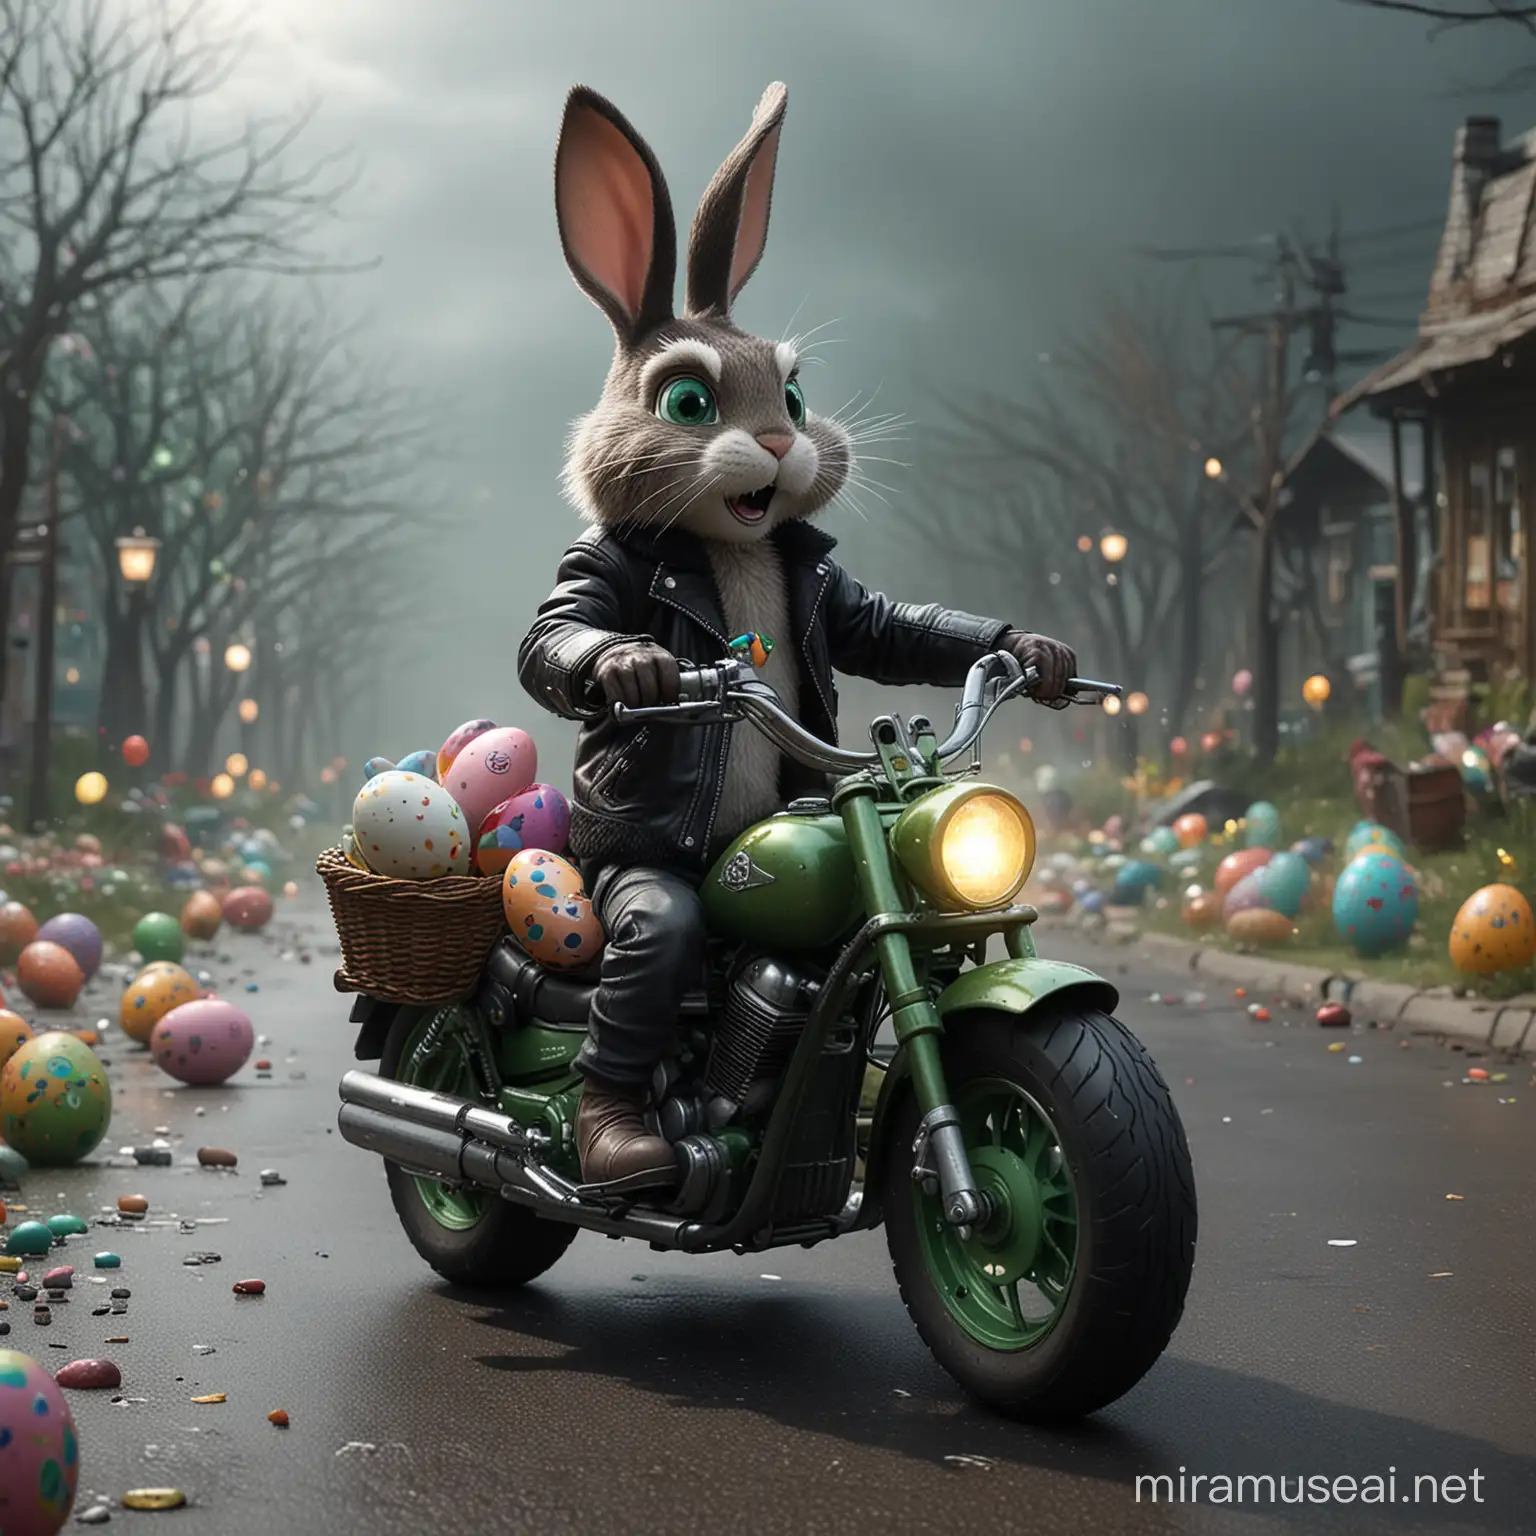 frightened Easter bunny with huge eyes, black fur and leather jacket and exaggerated cartoon features rides a green metallic painted chopper motorcycle. Behind the bunny is a basket of brightly painted Easter eggs that fall out as he rides.
The Easter bunny is driving away from a disaster in the background. anthropomorphic, screaming, moving, action burst, misty, stormy, 70mm, cinematic, highly detailed, debris, sparkling lights, aura,